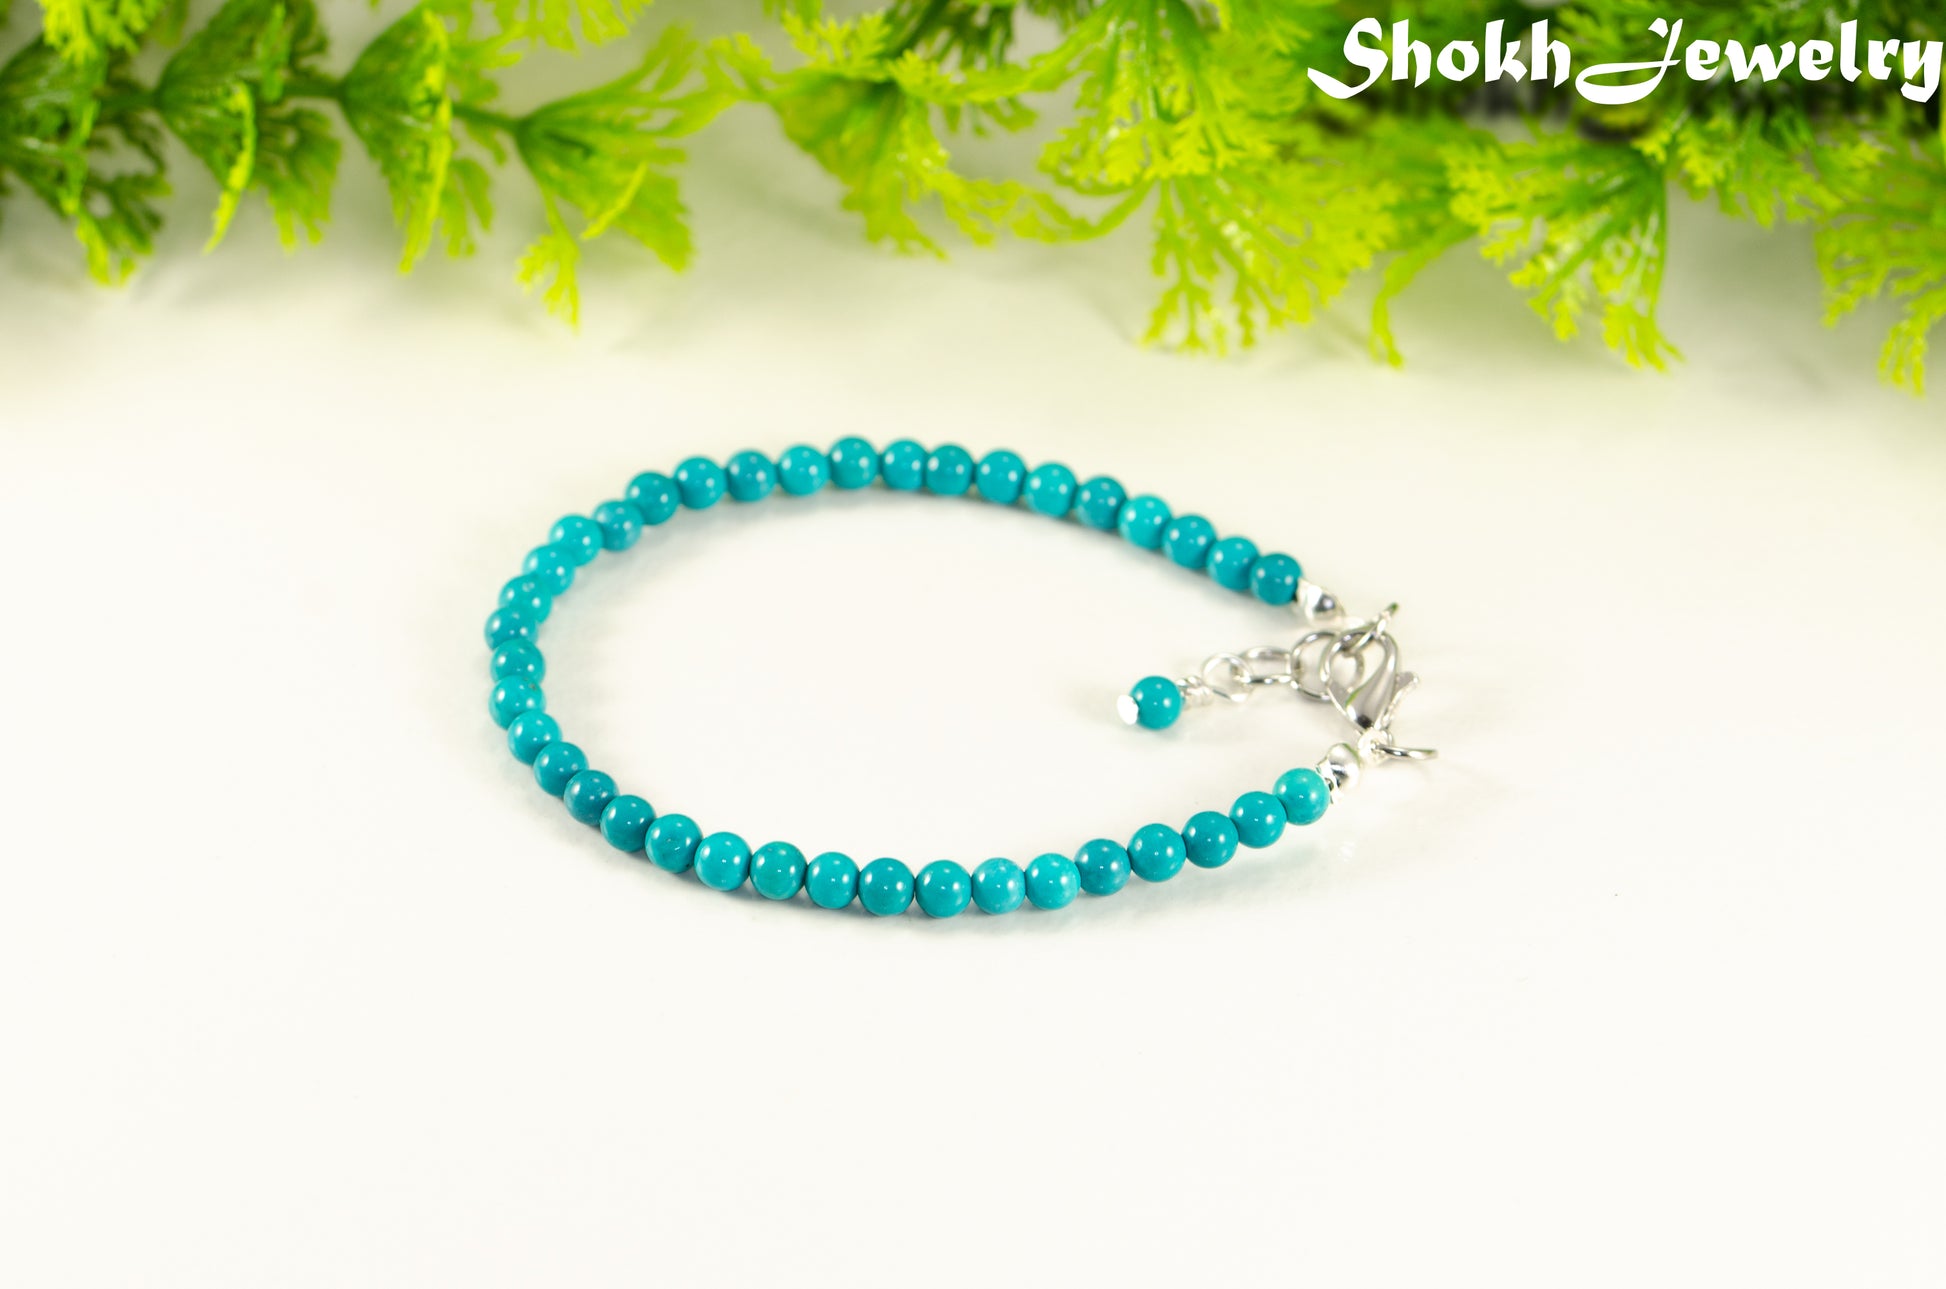 4mm Turquoise Stone Bracelet with Clasp.